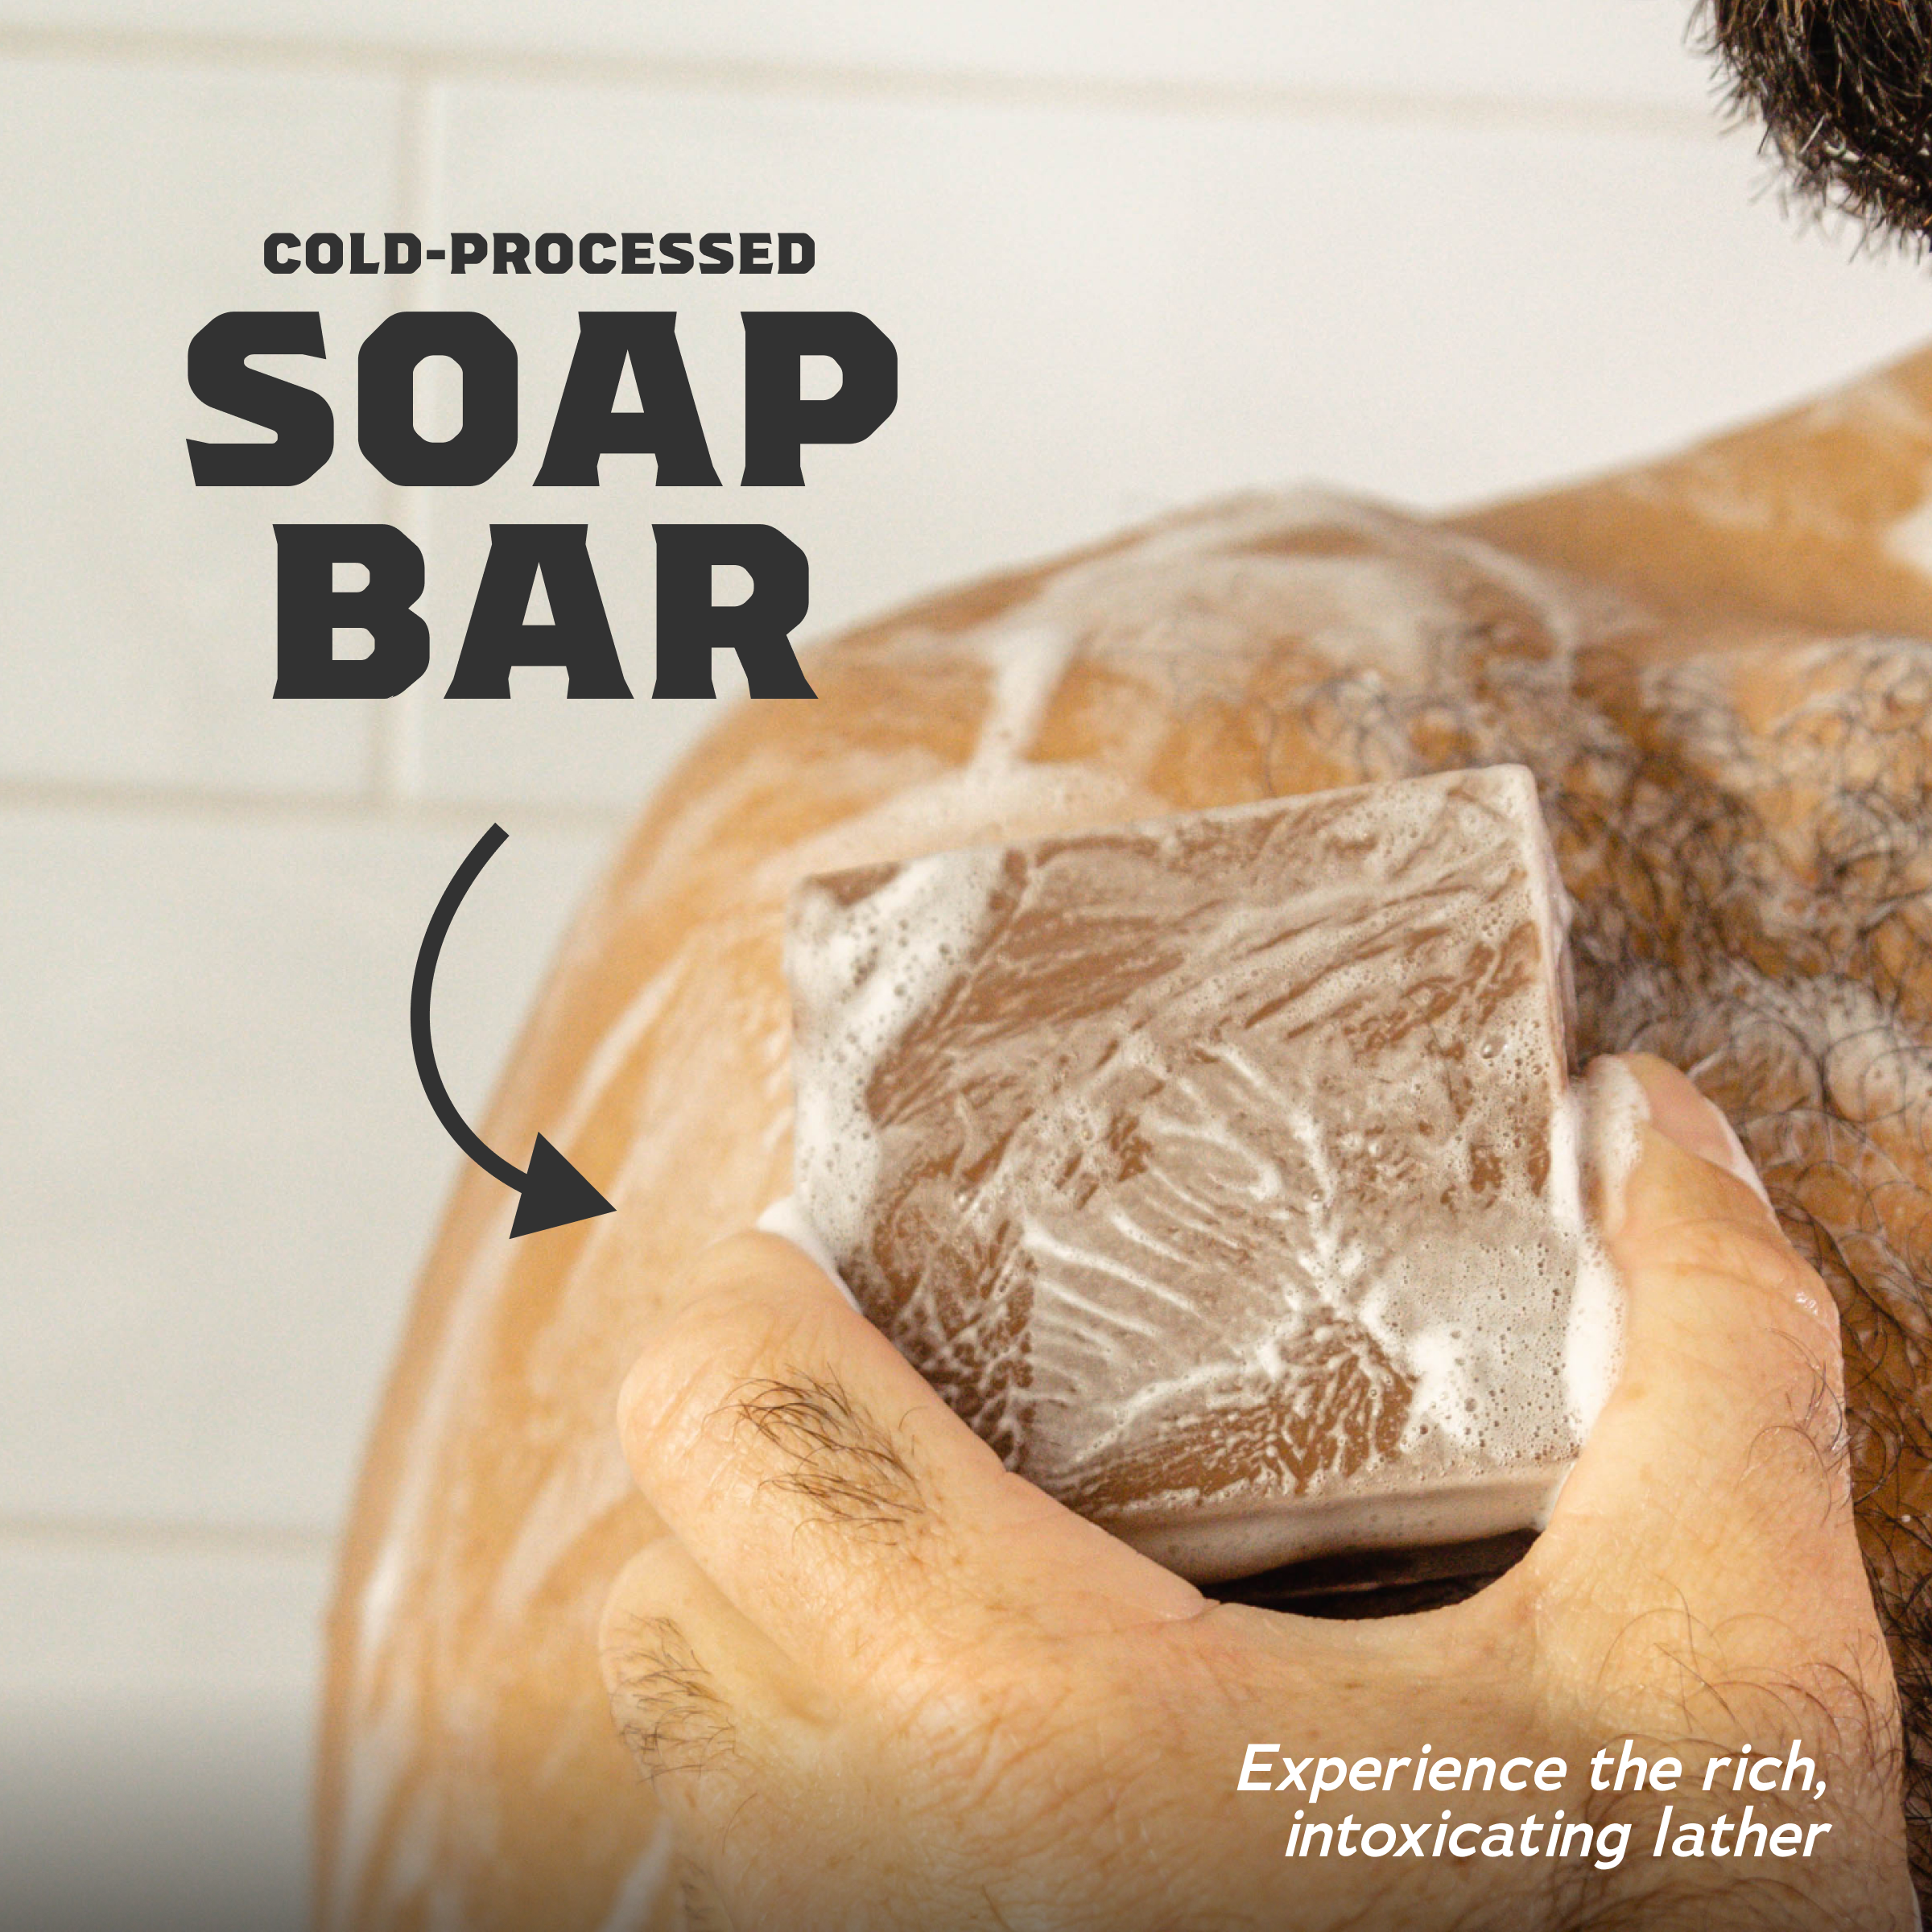 Dr. Squatch - 5 Pro Tips To Extend The Life Of Your Soap 